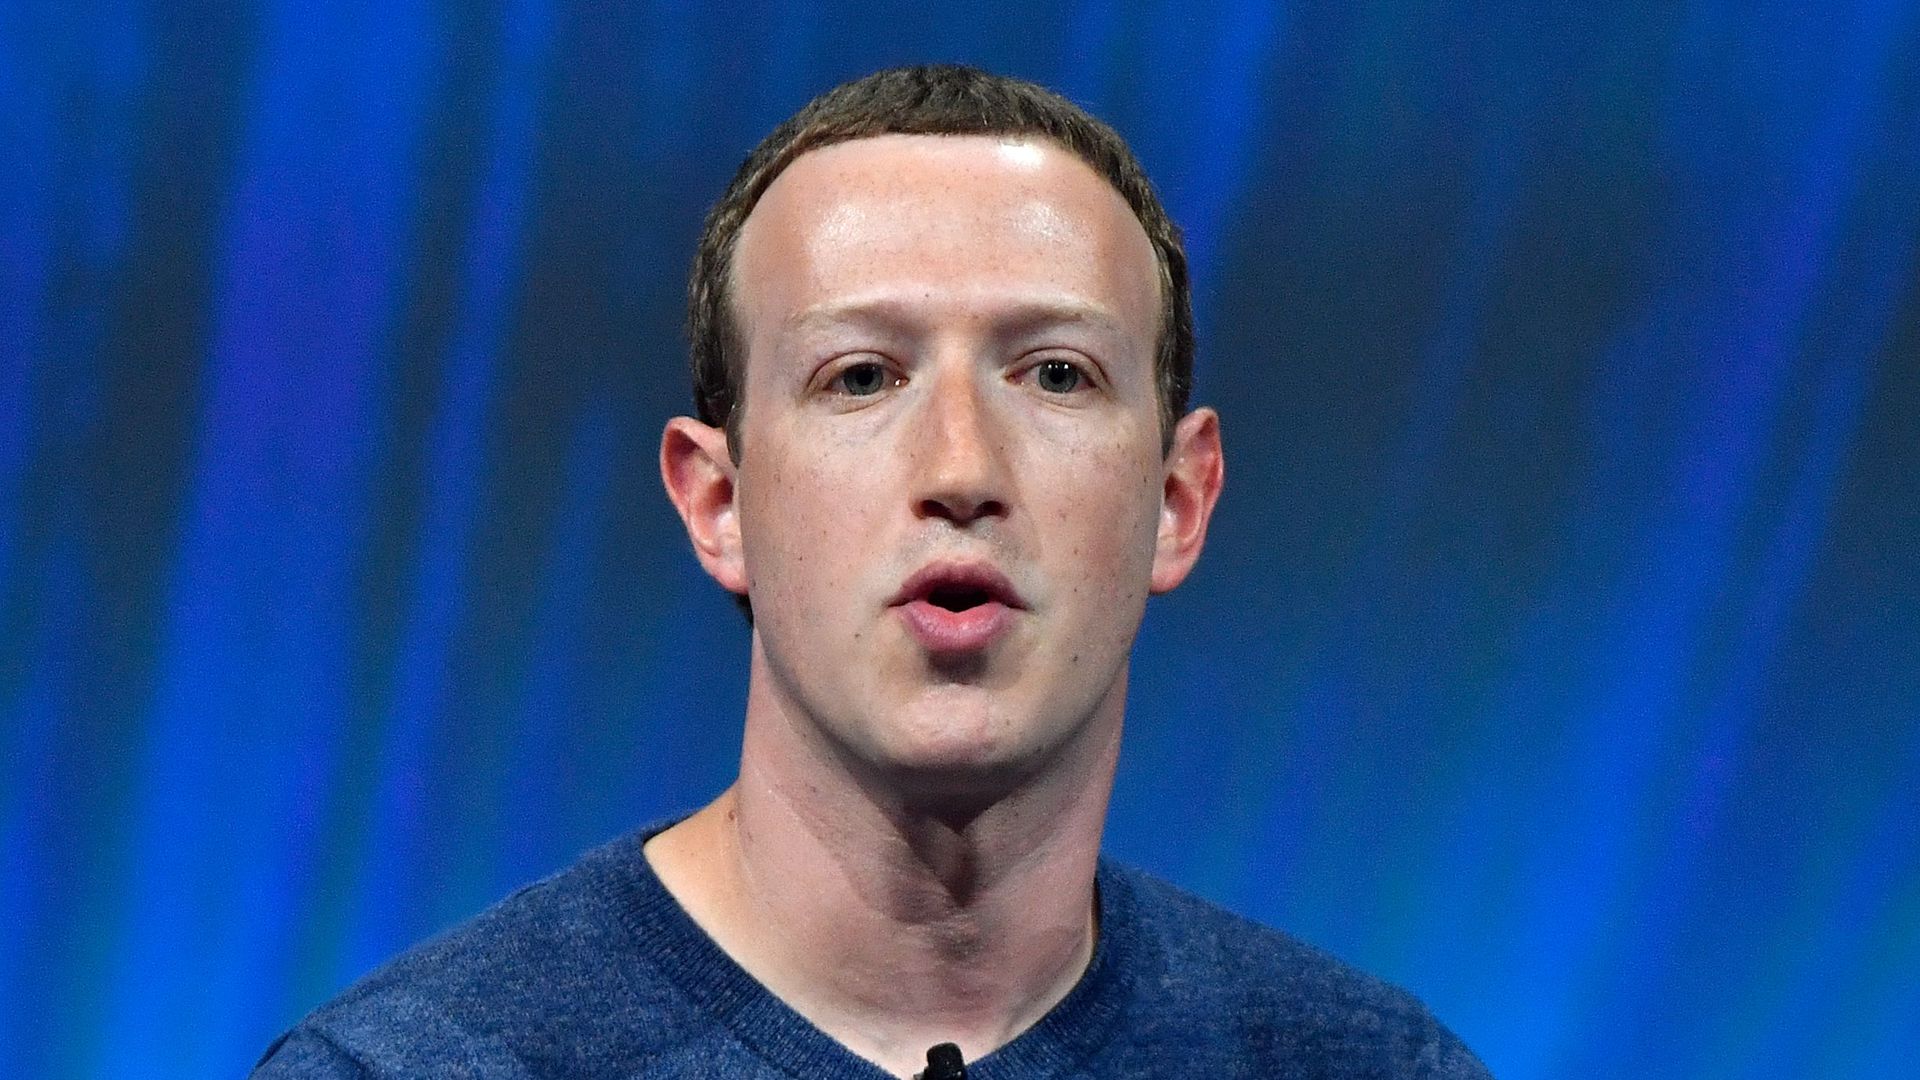 In this image, Mark Zuckerberg speaks into a microphone. 